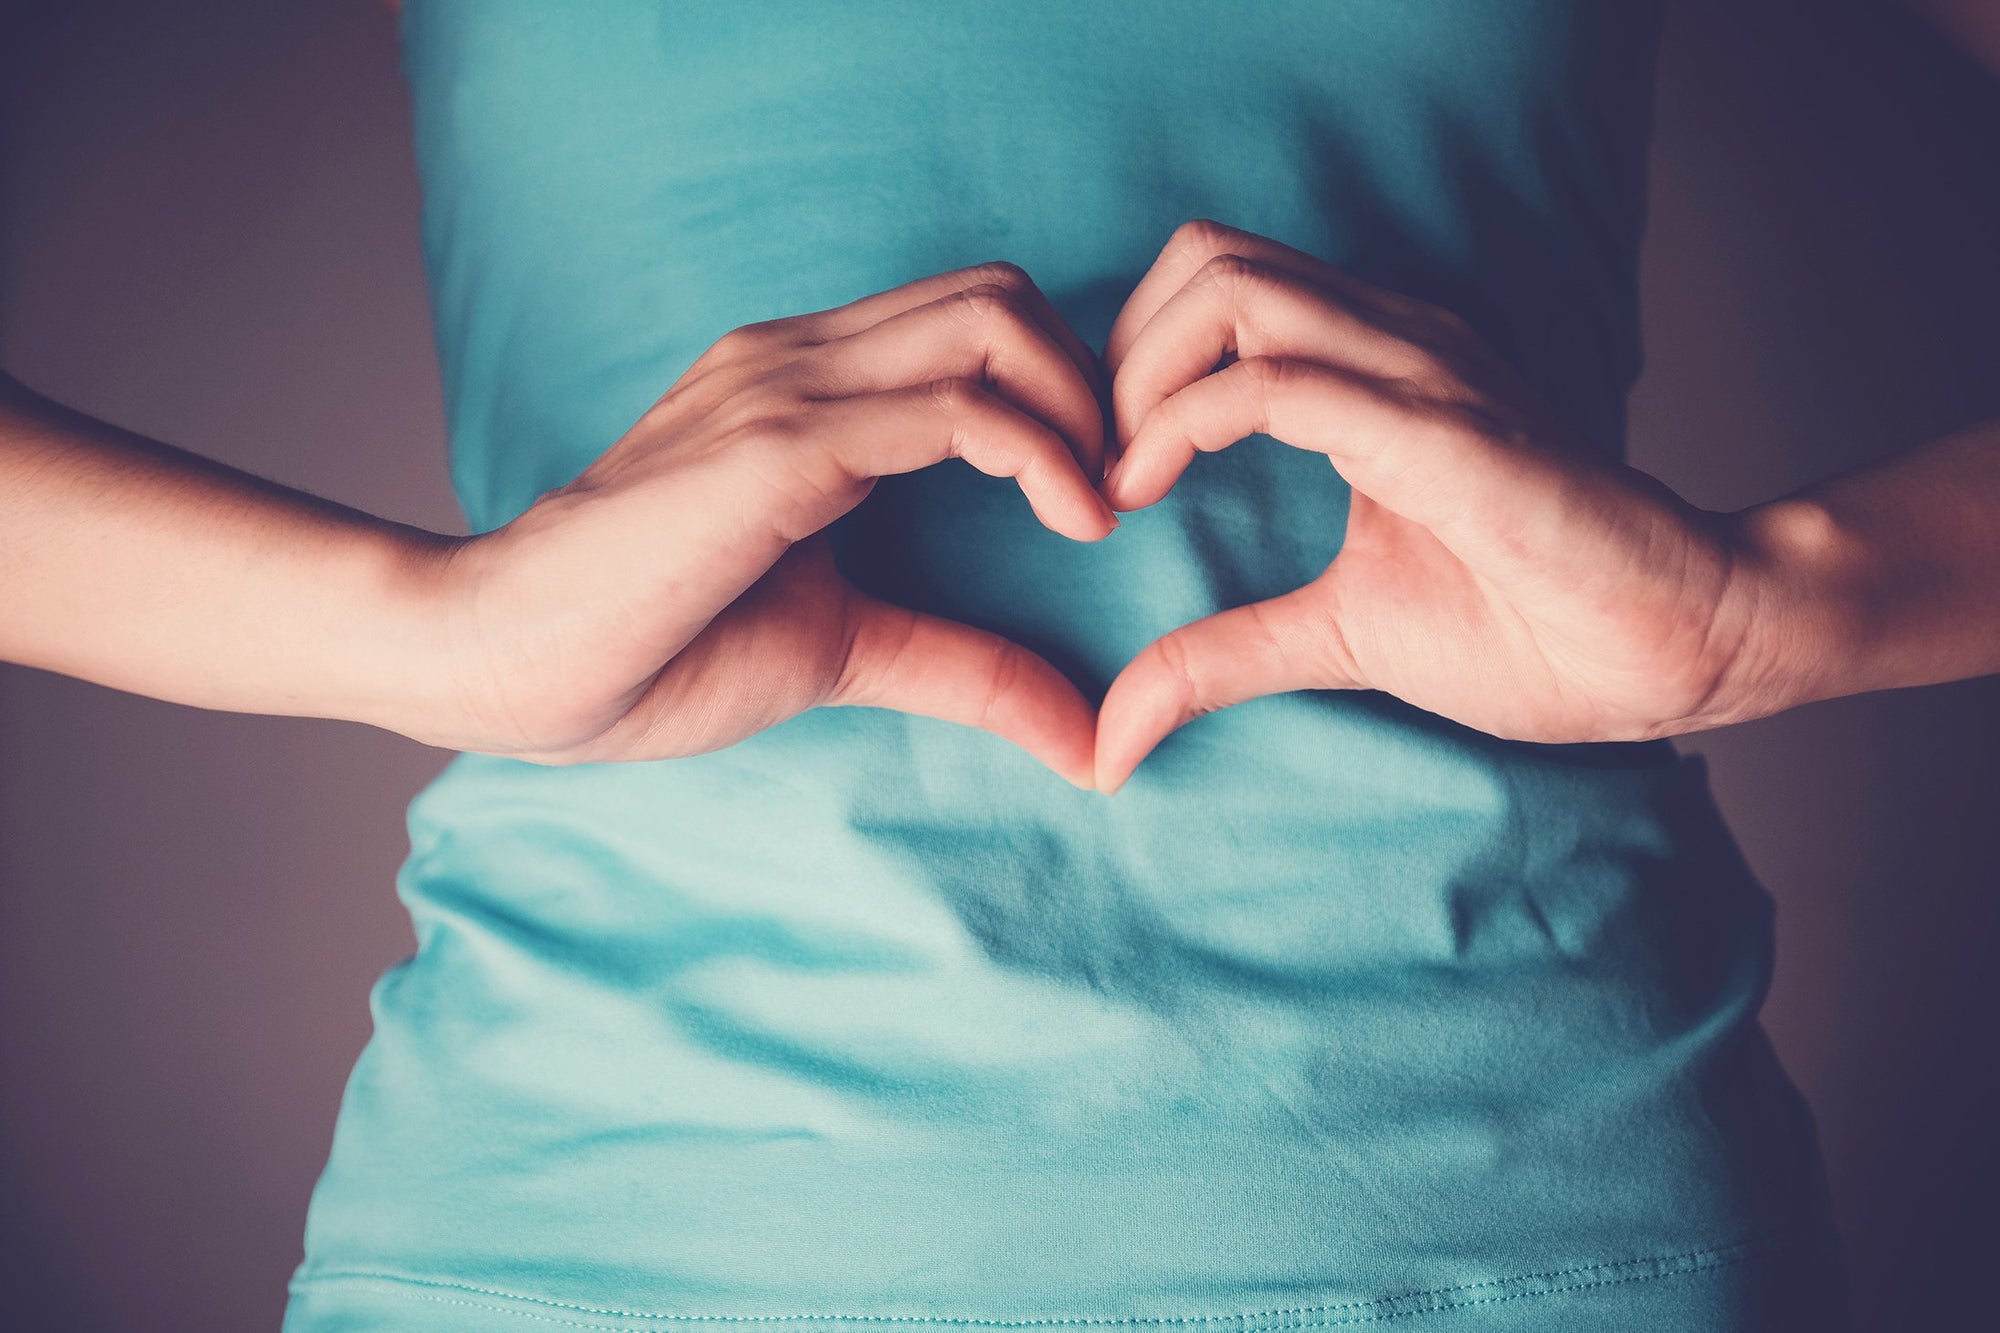 Woman making a heart with her hands next to her stomach